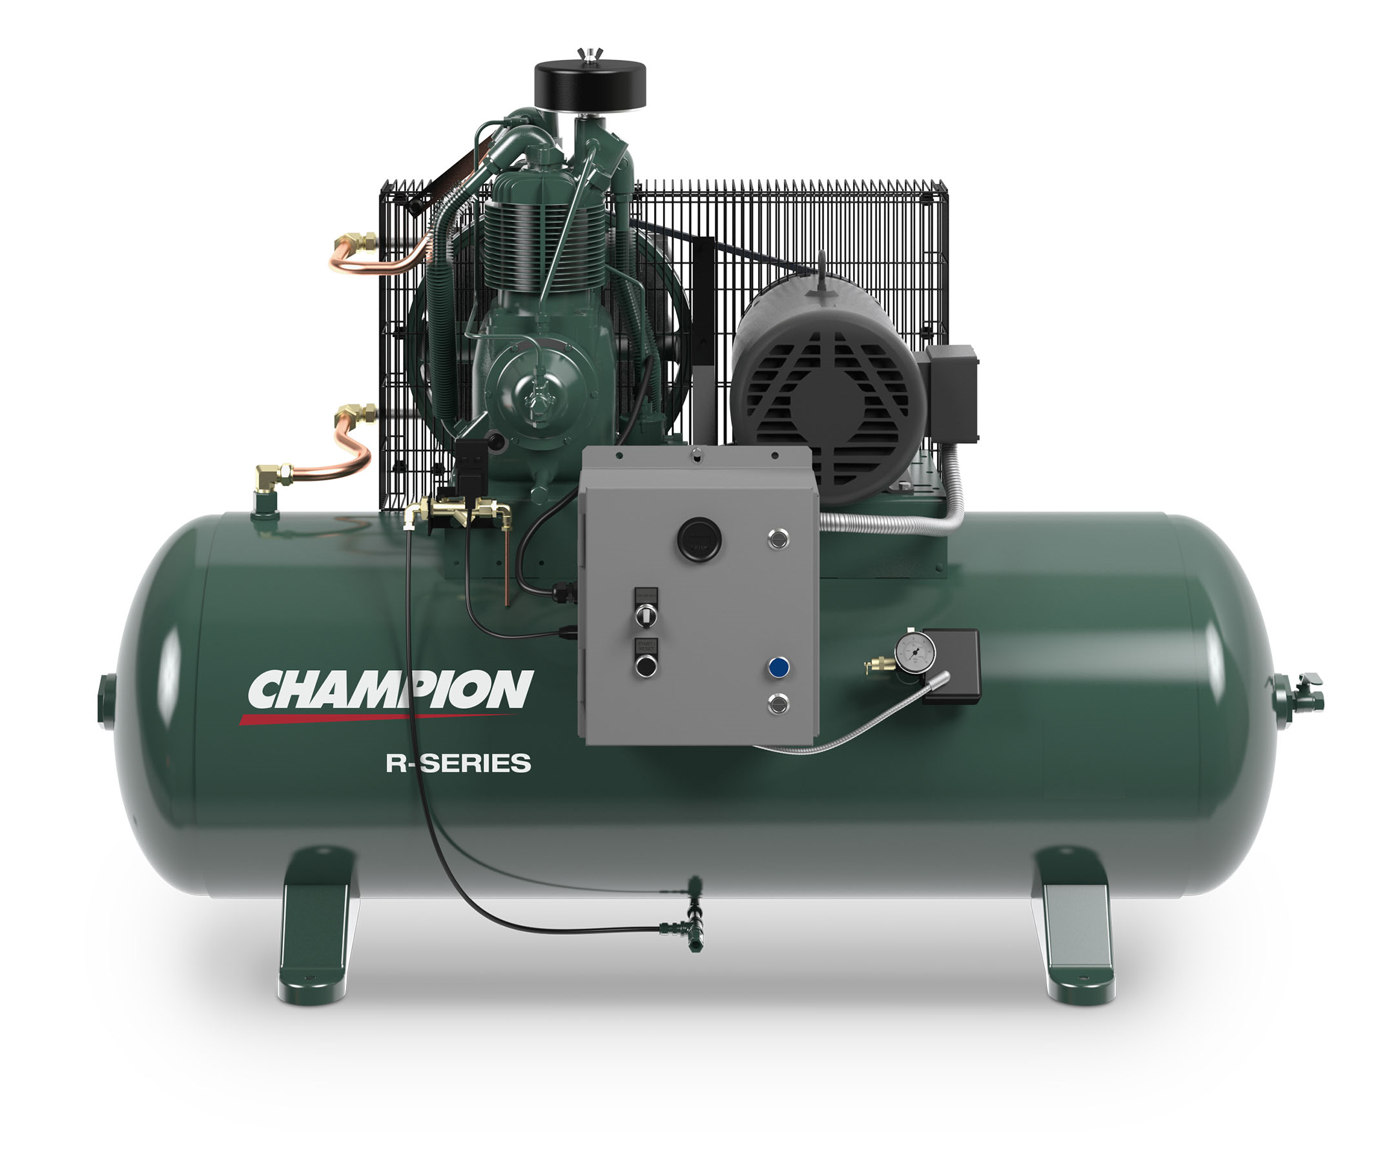 Champion R Series Reciprocating Air Compressor Technical Specifications